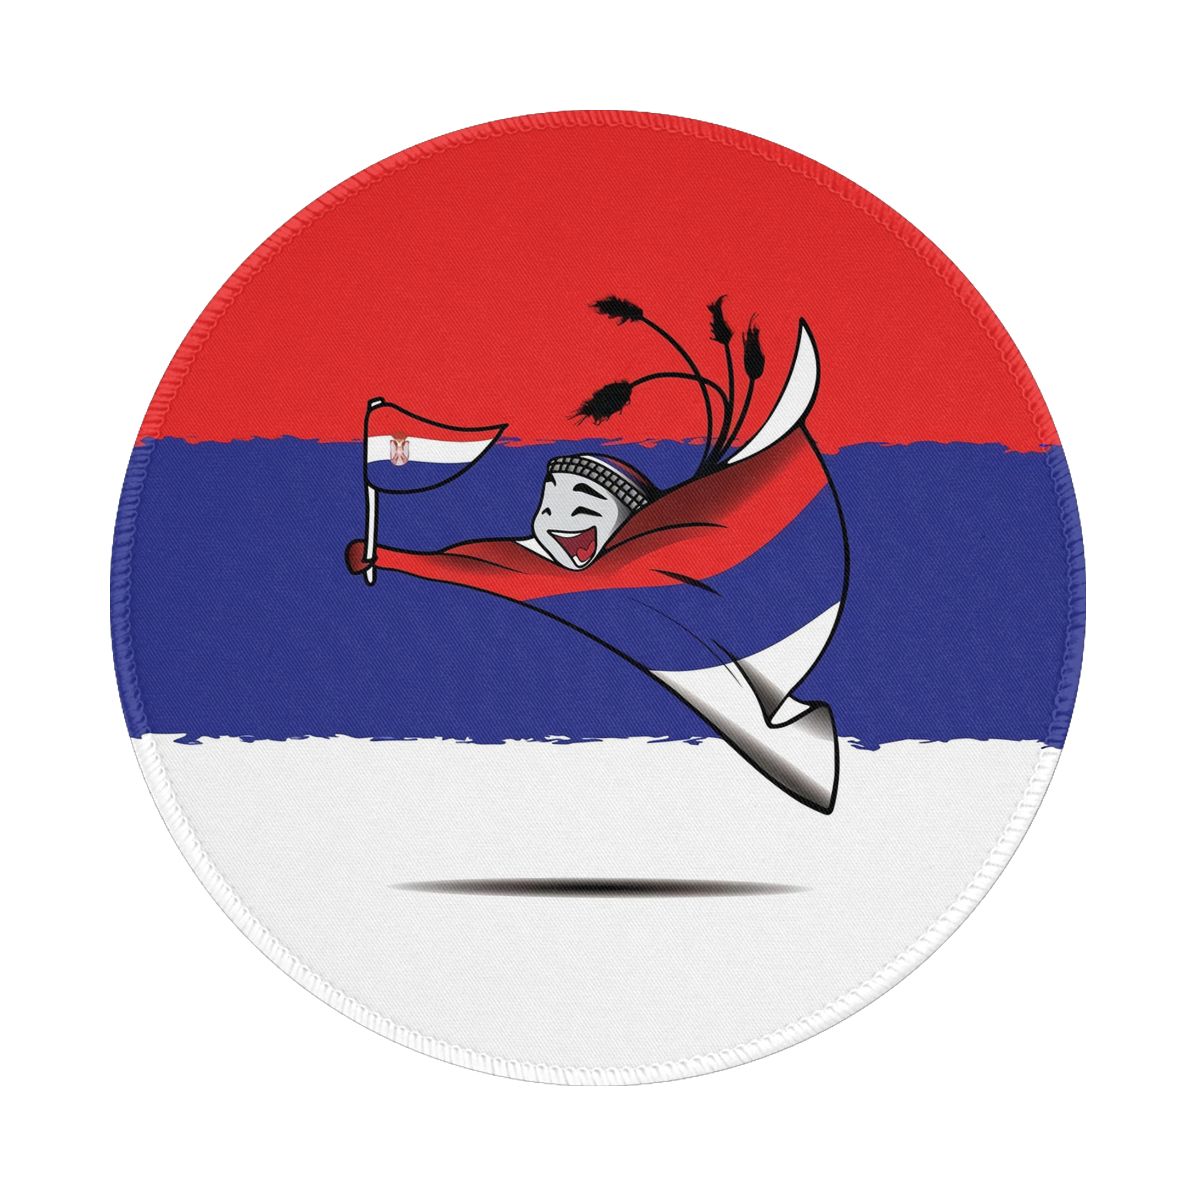 Serbia World Cup 2022 Mascot Gaming Round Mousepad for Computer Laptop